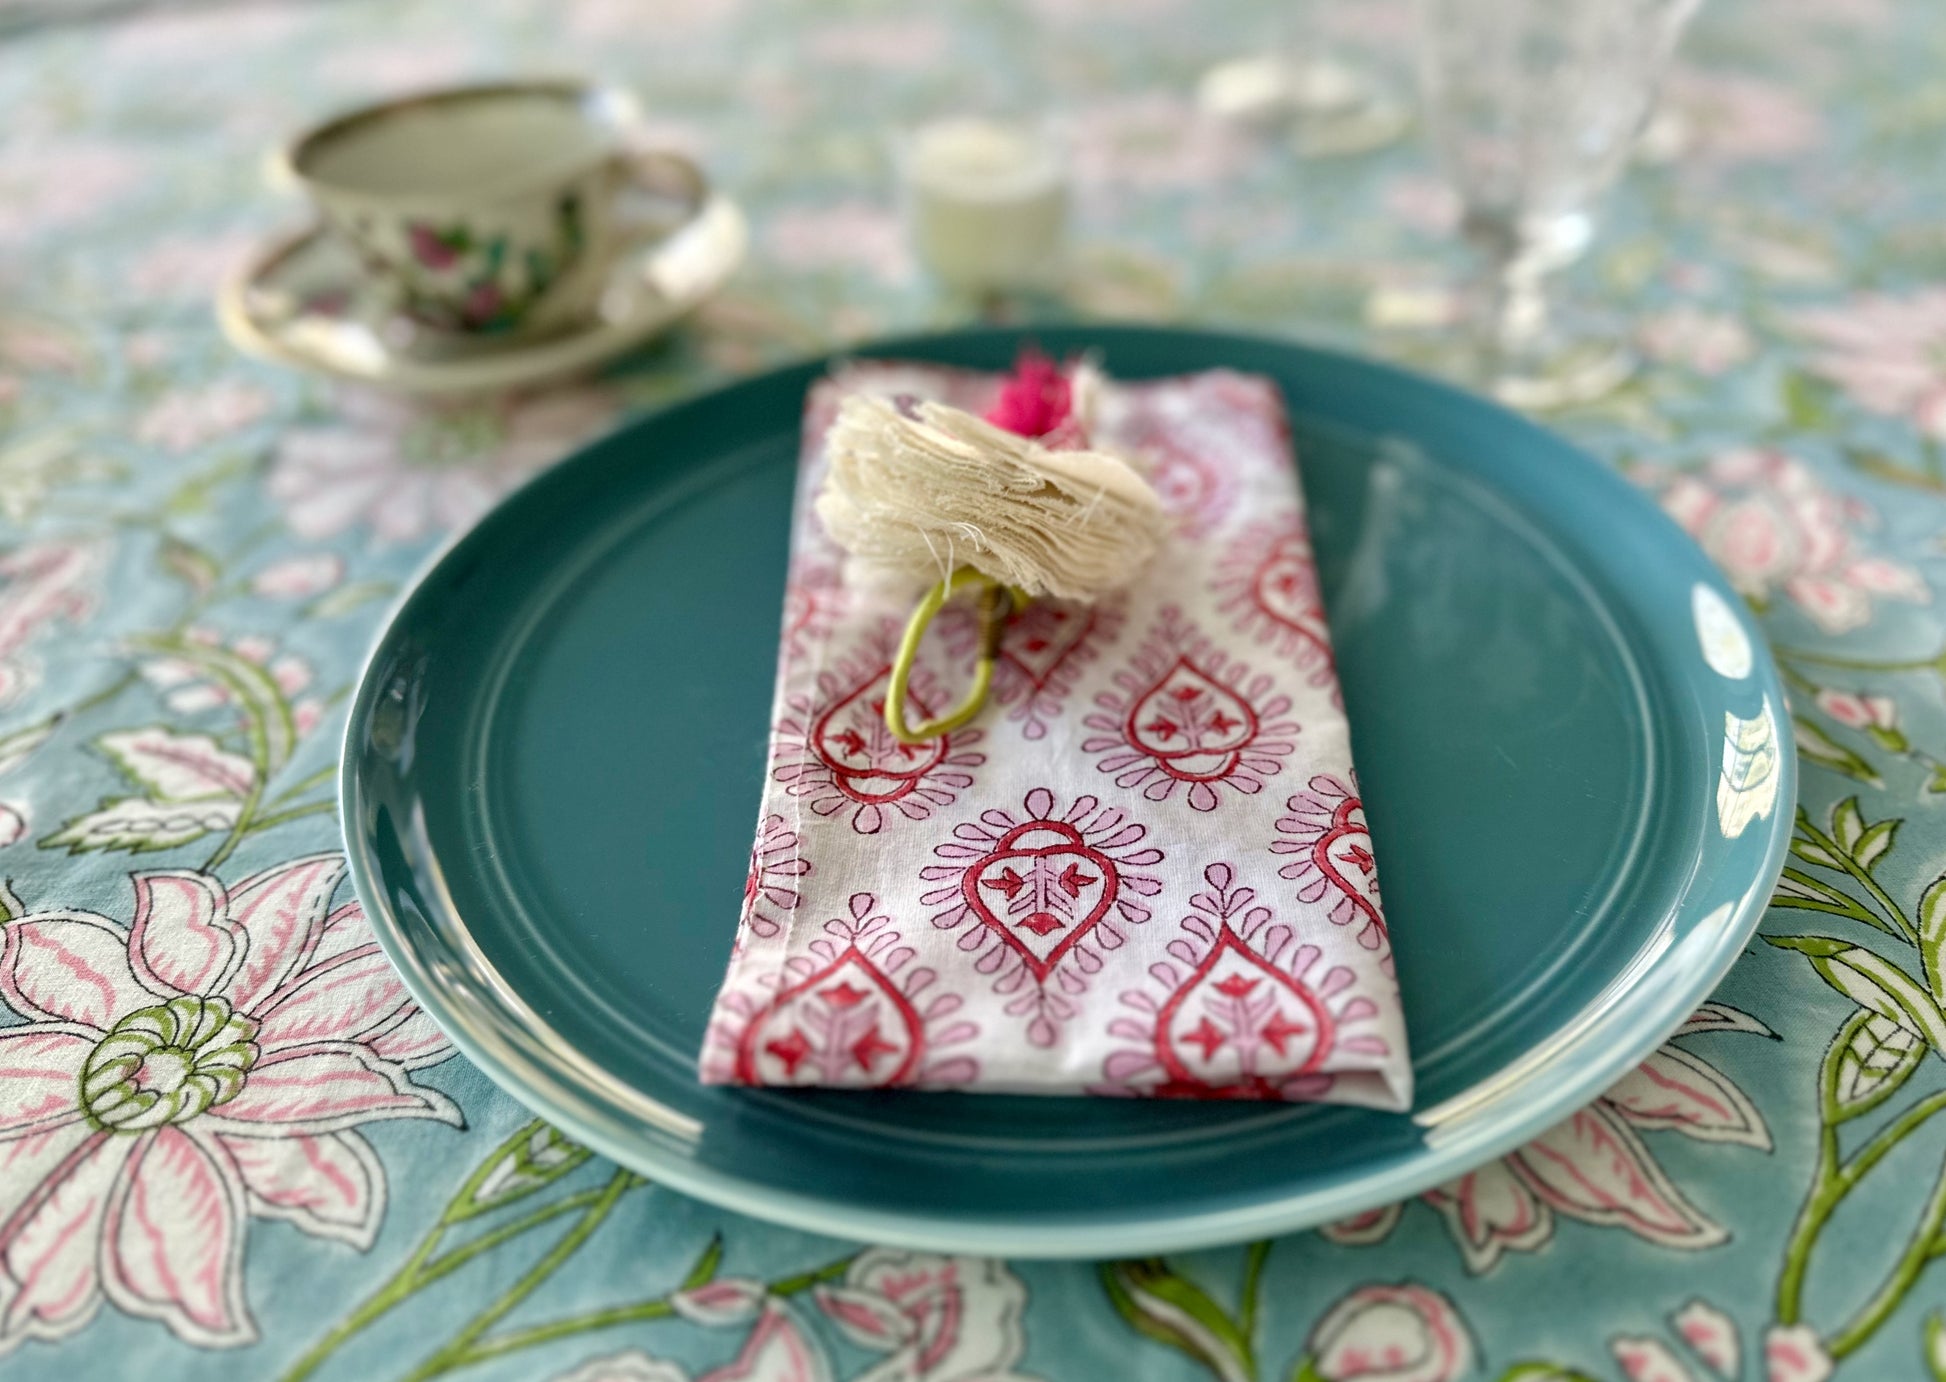 Made-to-Order Pink and Green Block Print Table Cloth, Table Linen, Wedding Table Cloth - DharBazaar